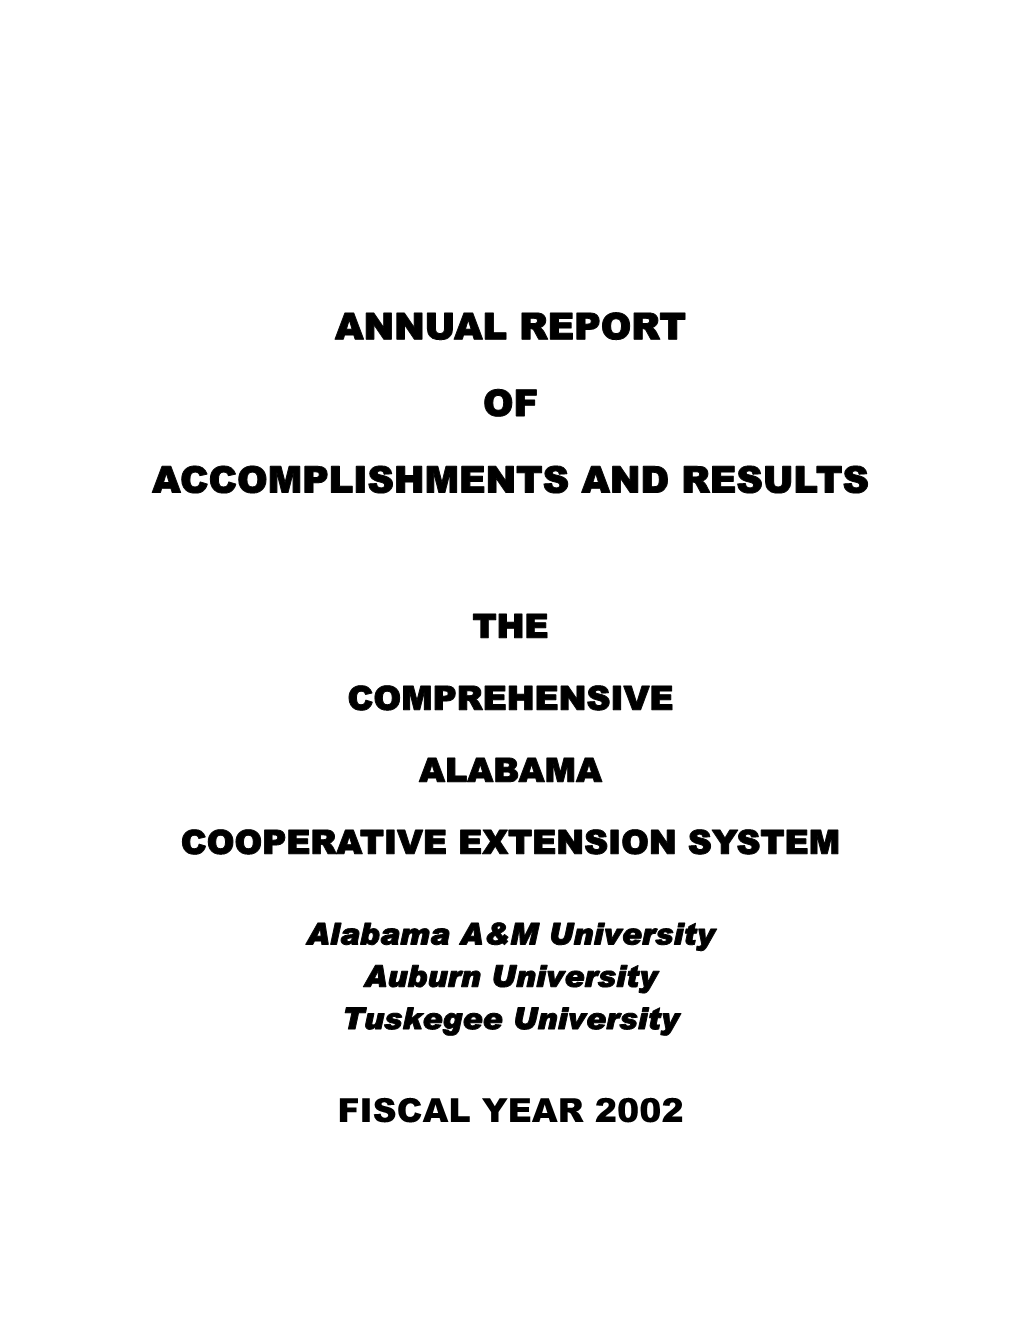 Annual Report of Accomplishments and Results: Multistate Extension Activities and Integrated Activities